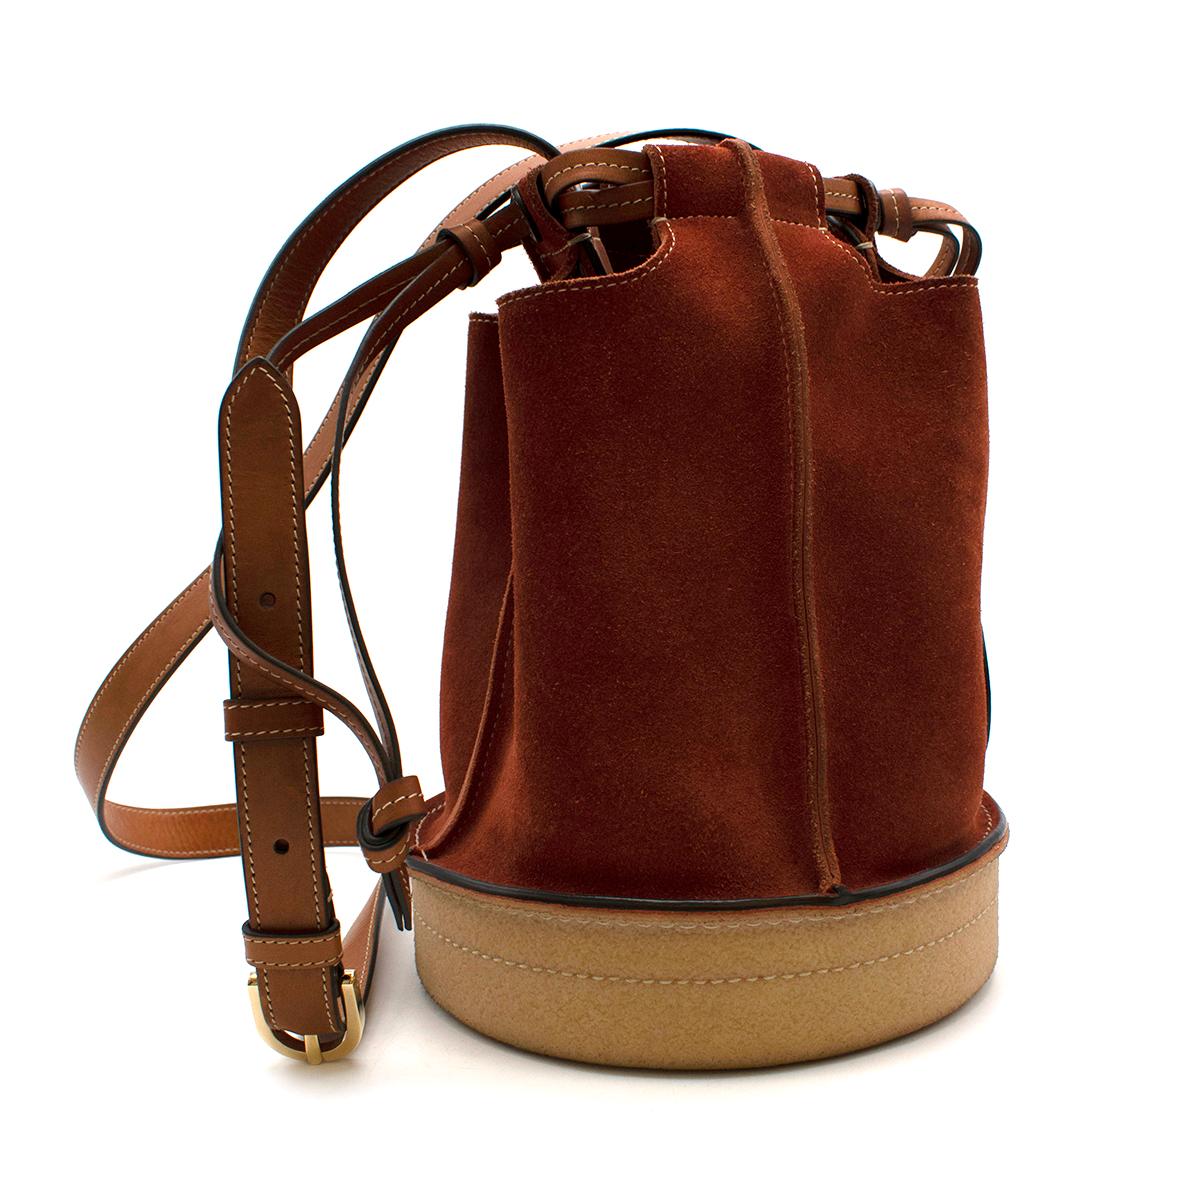 Lanvin Rust Suede Bucket Bag

Lanvin switches up the classic bucket bag style, introducing a more contemporary offering in the form of this drawstring bucket bag. Designed with a rust-orange calf suede exterior and a leather lining, this small-scale